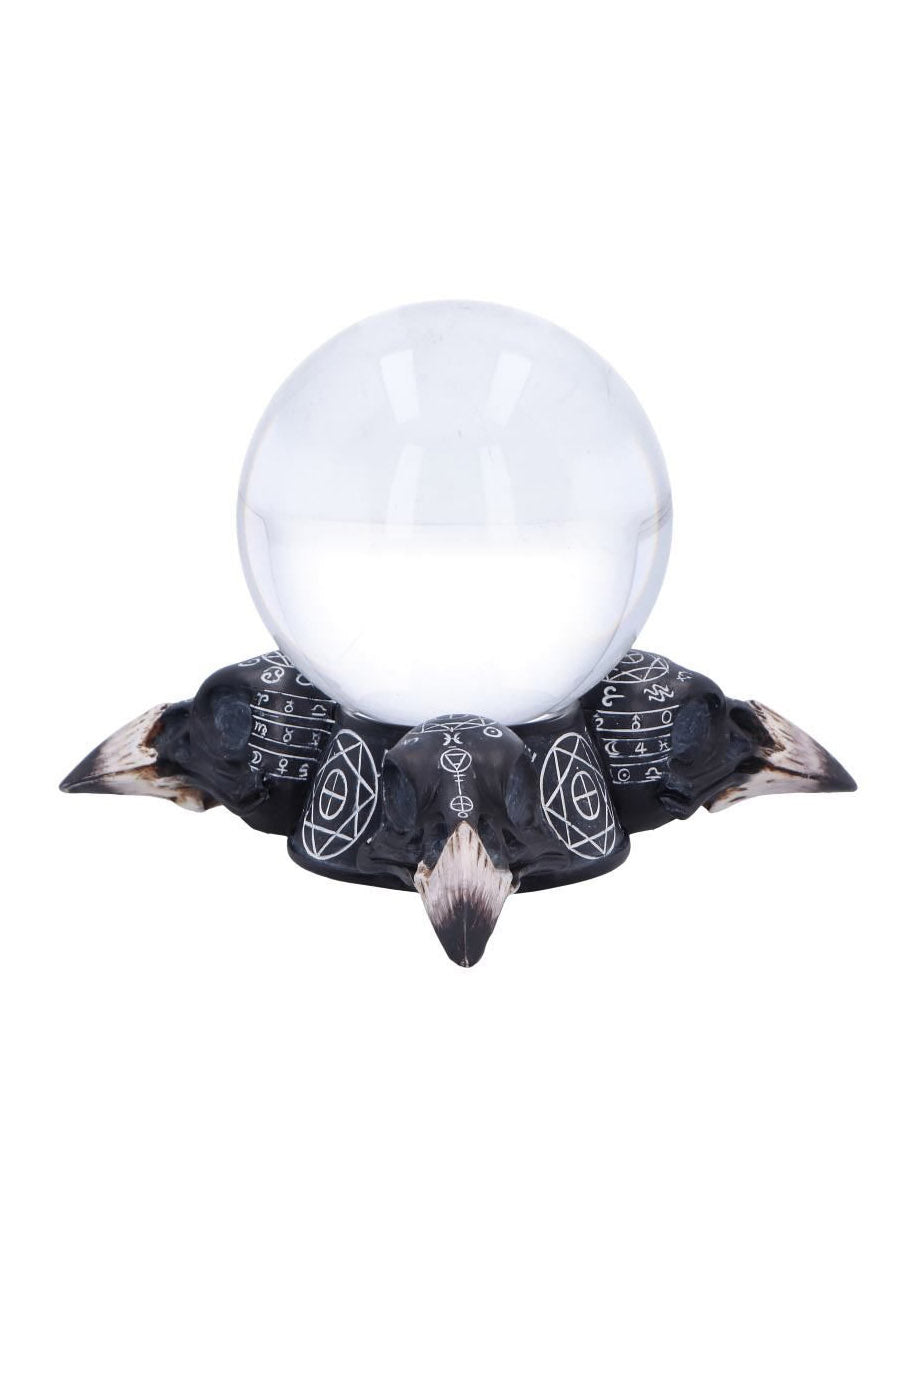 occult crystal ball with stand